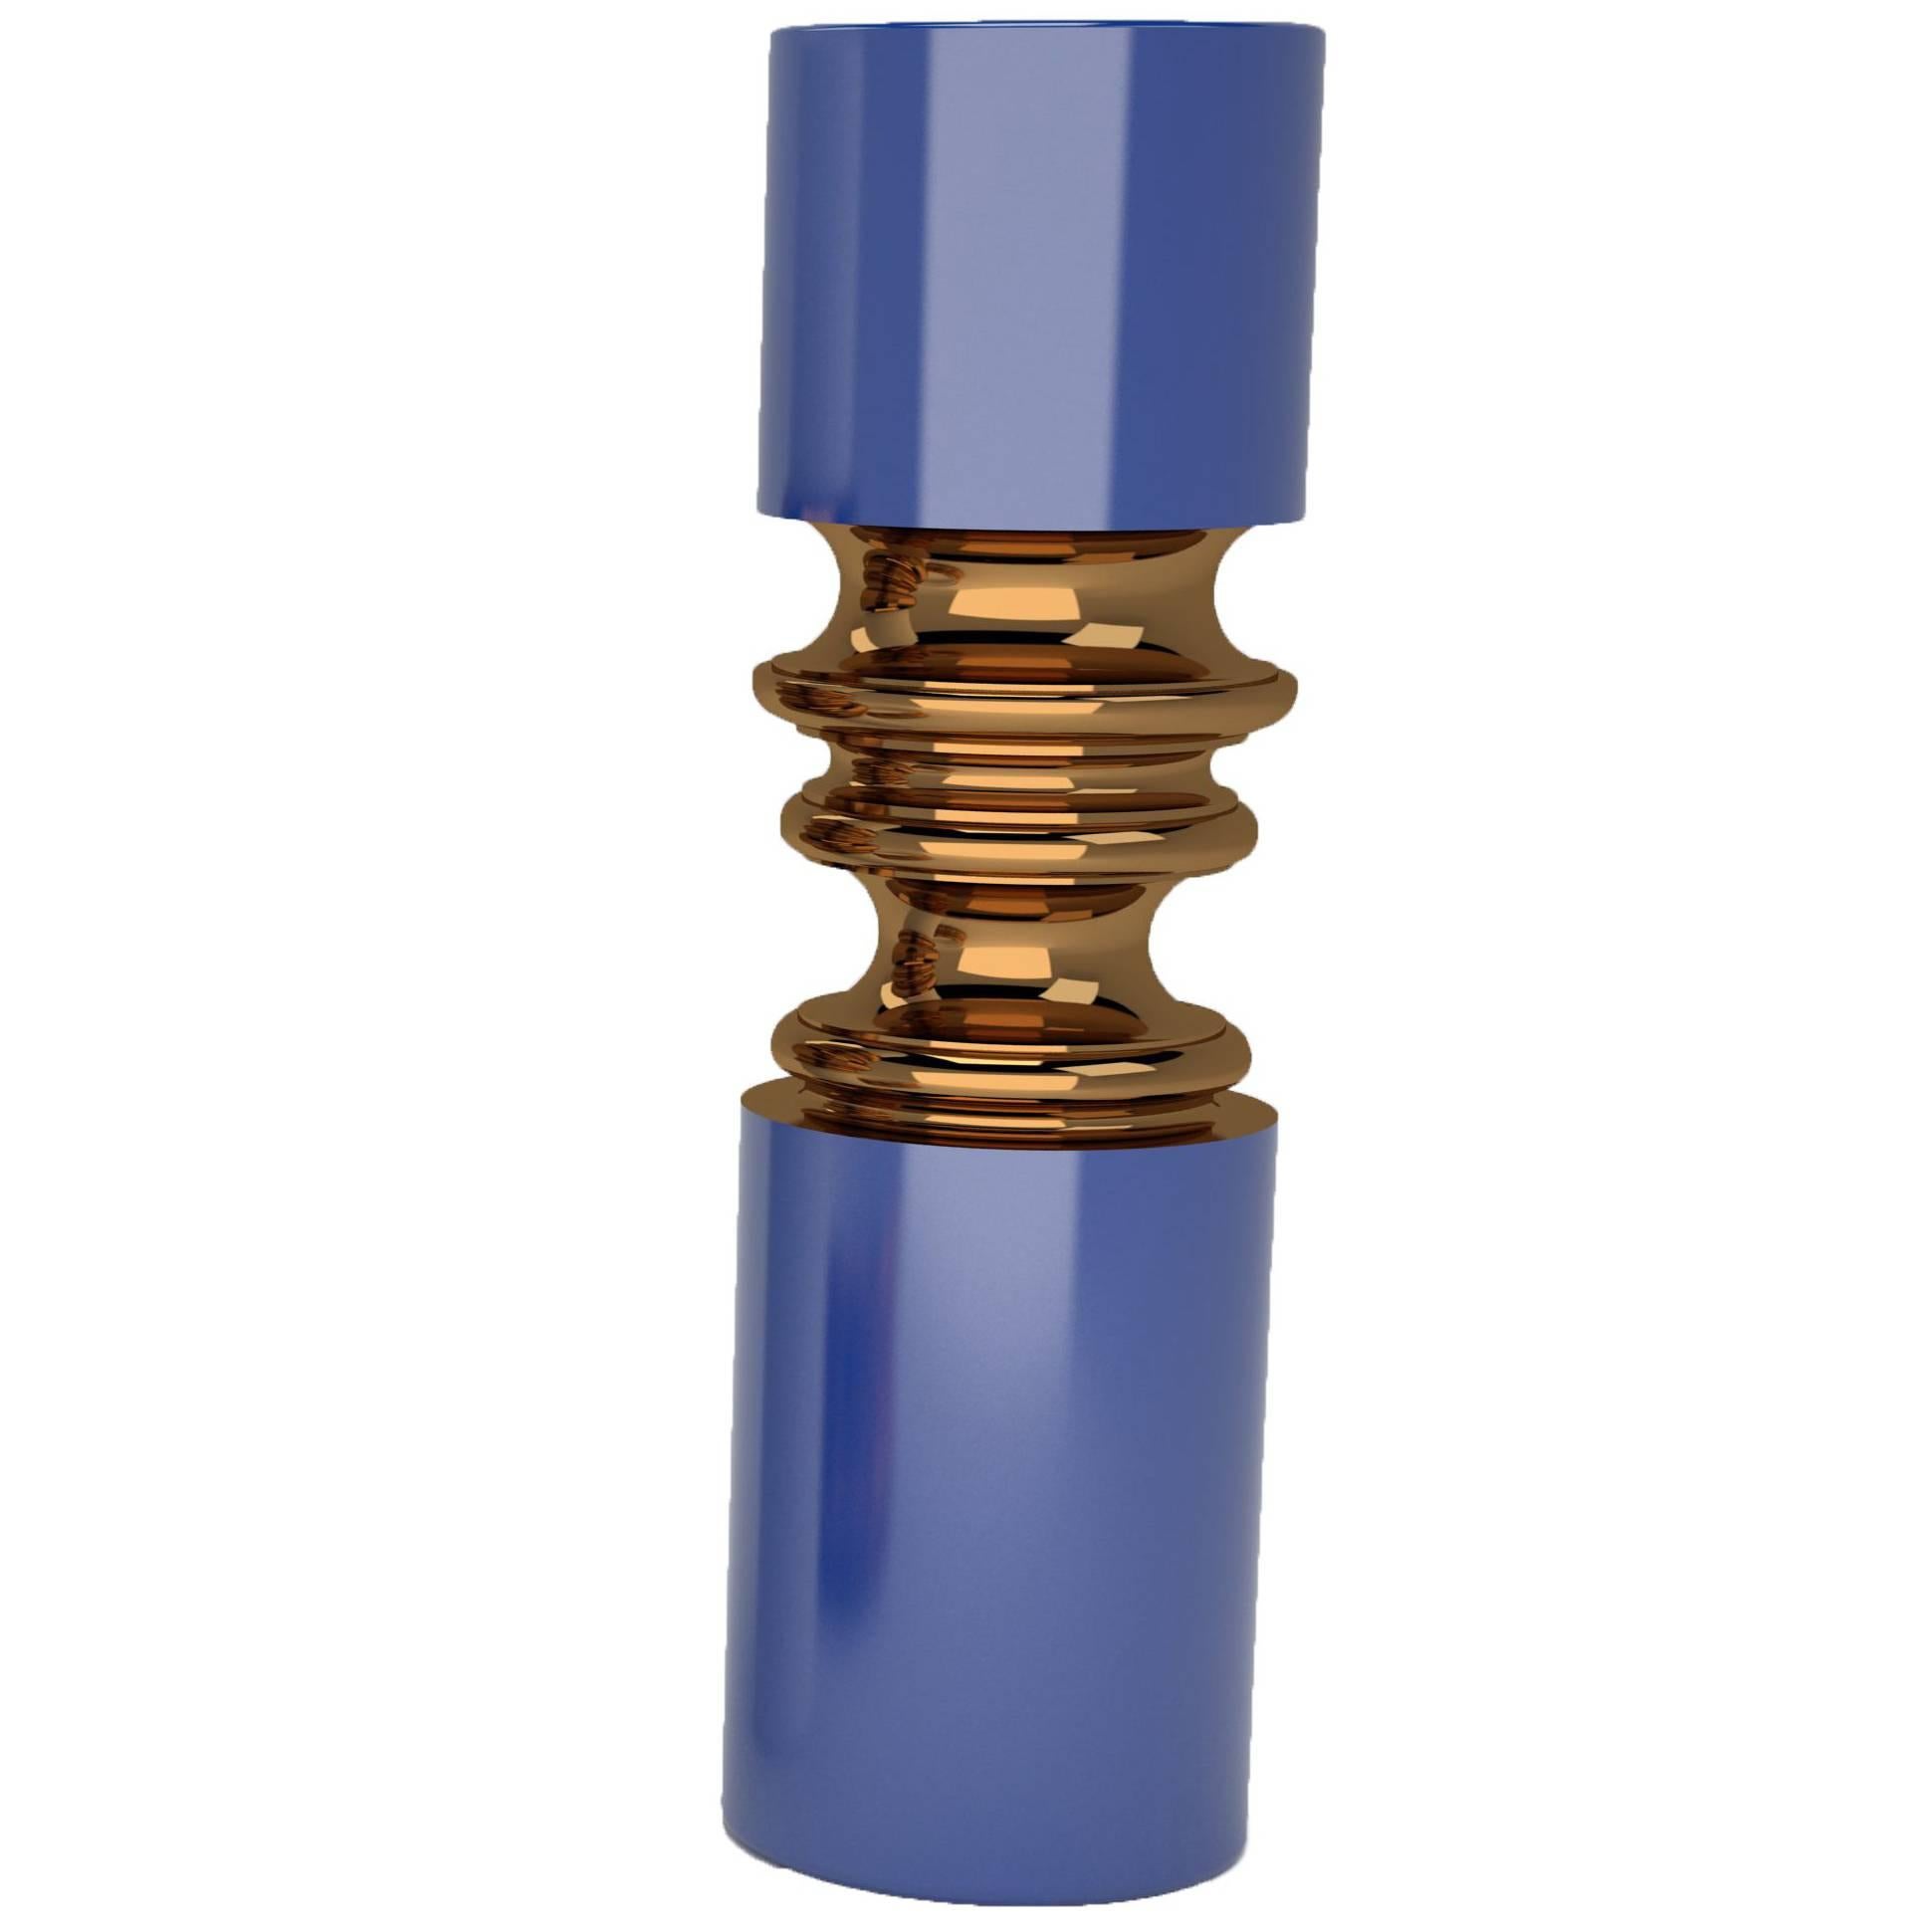 Ordini Narrow Vase with Cabadt Blue and Bronze Color by Analogia Project For Sale